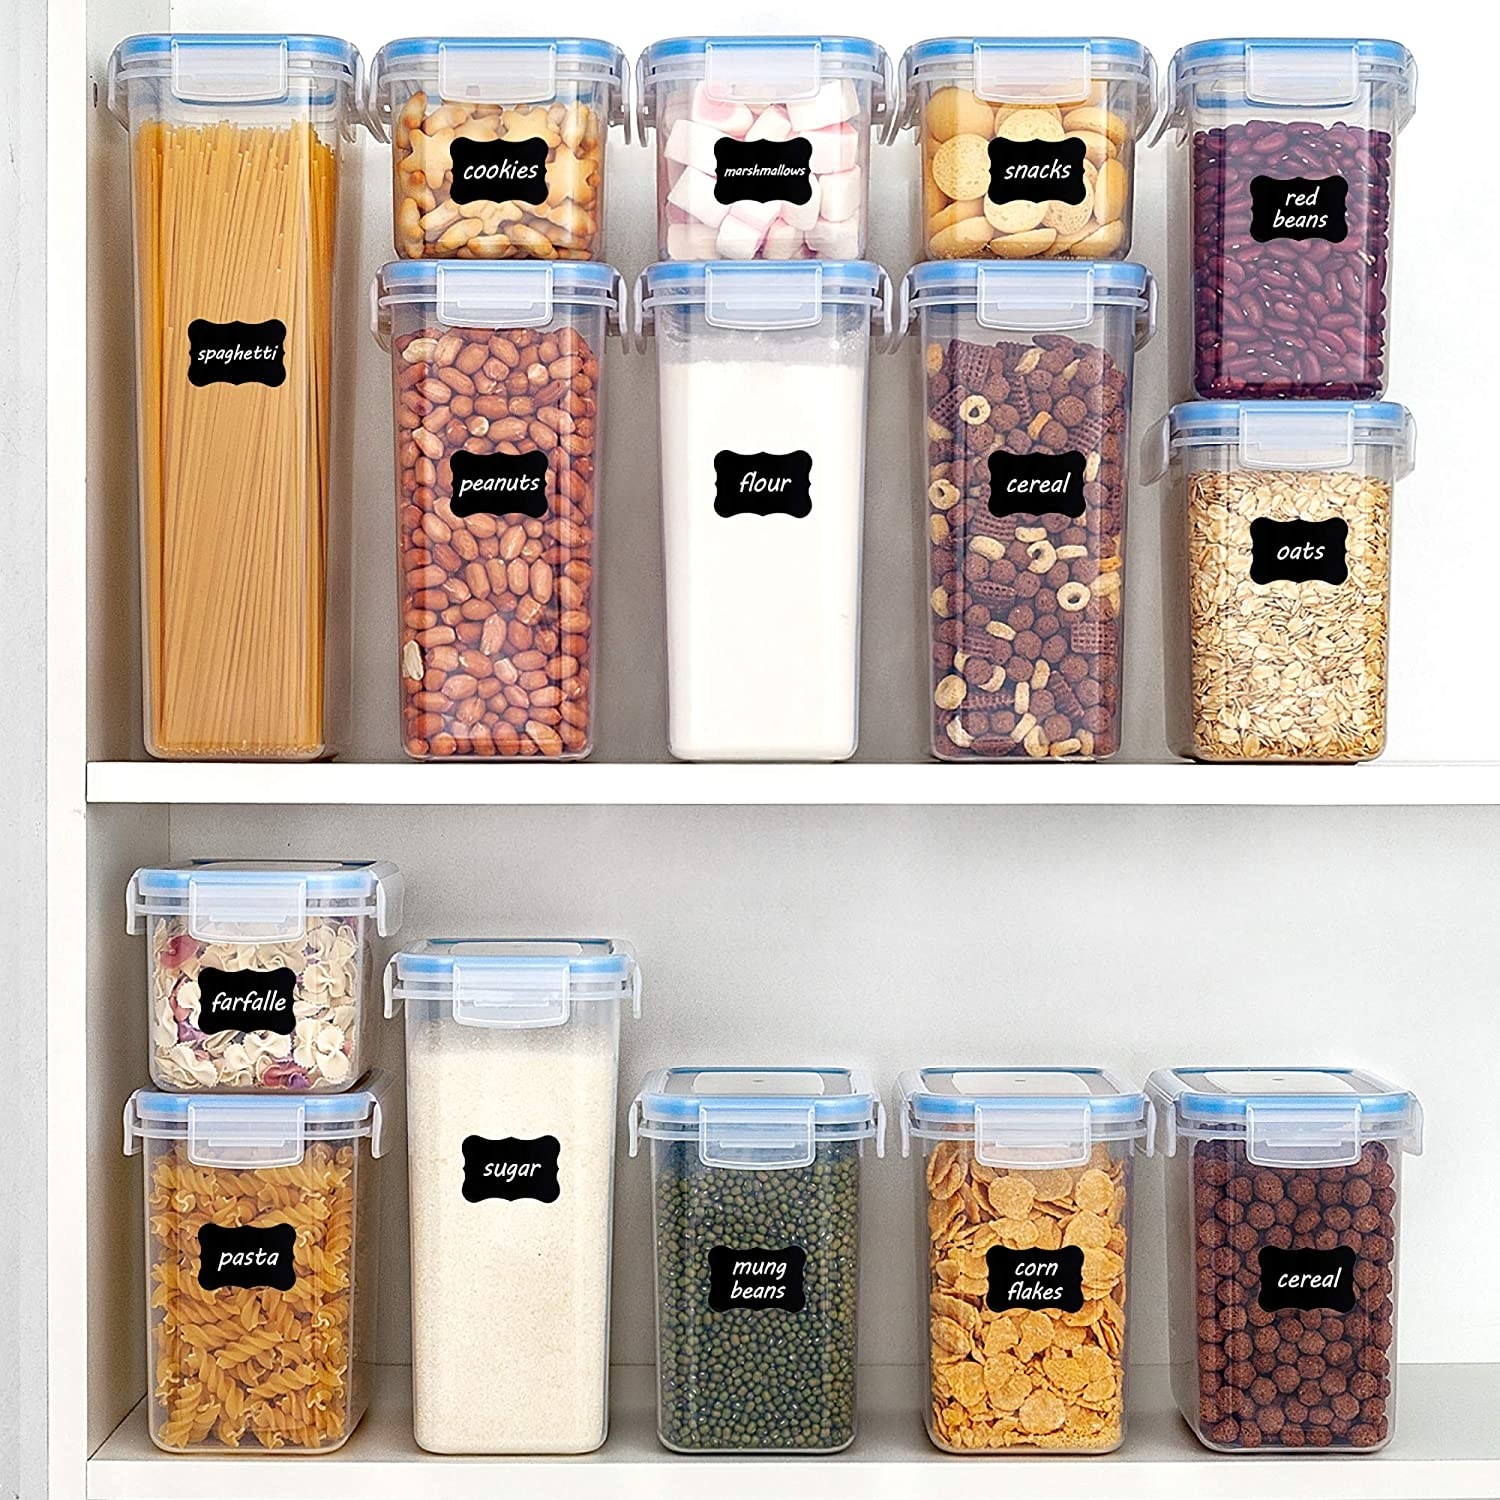 Get Your Home Insanely Tidy With These 18 Storage Organization Ideas - By  Sophia Lee